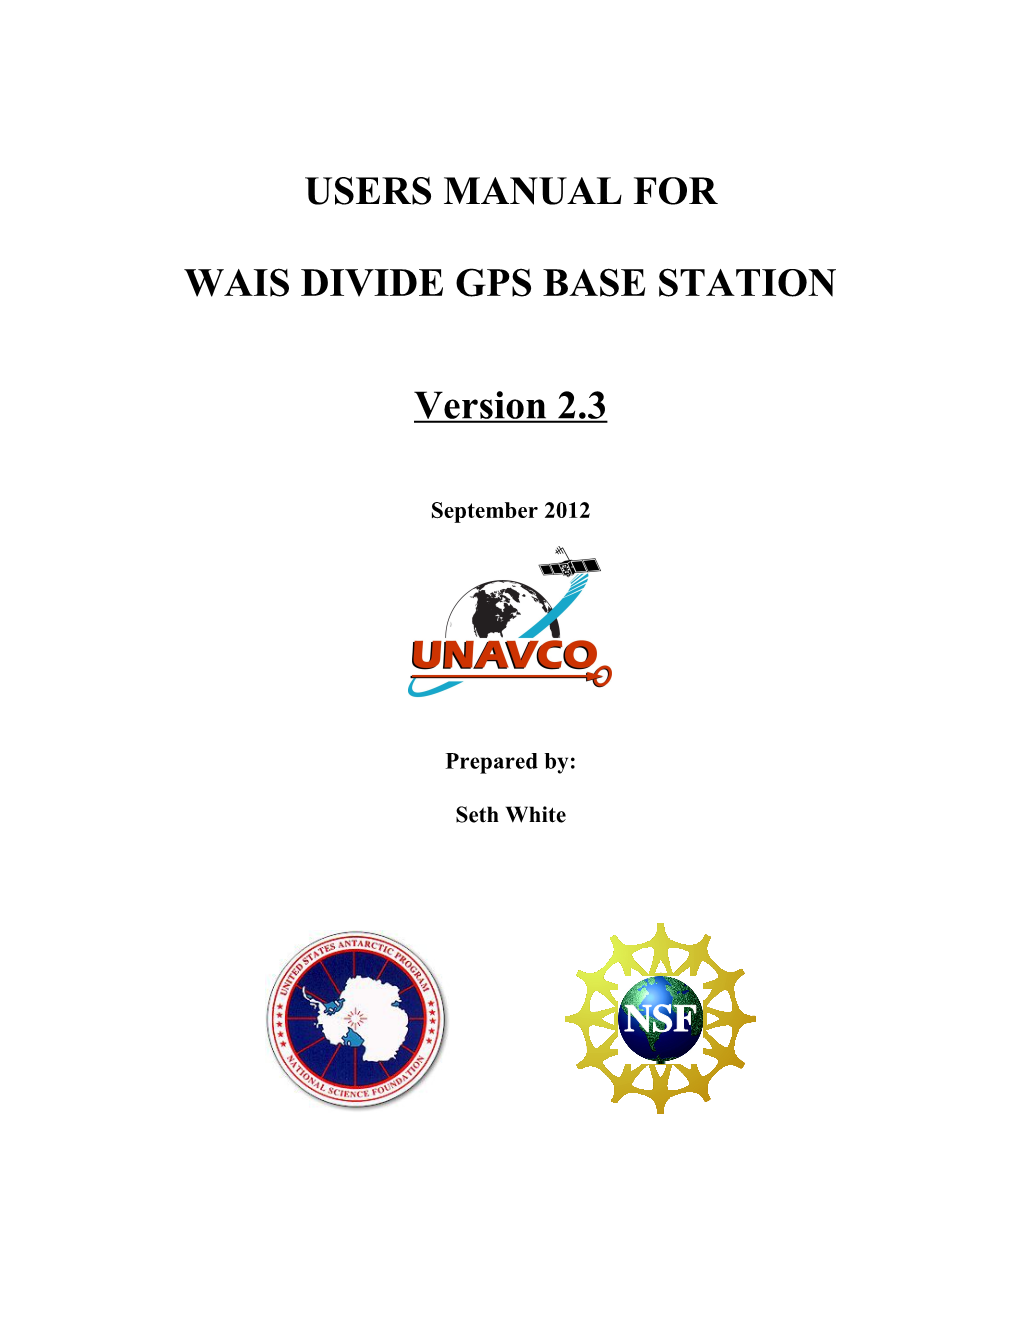 Users Manual For